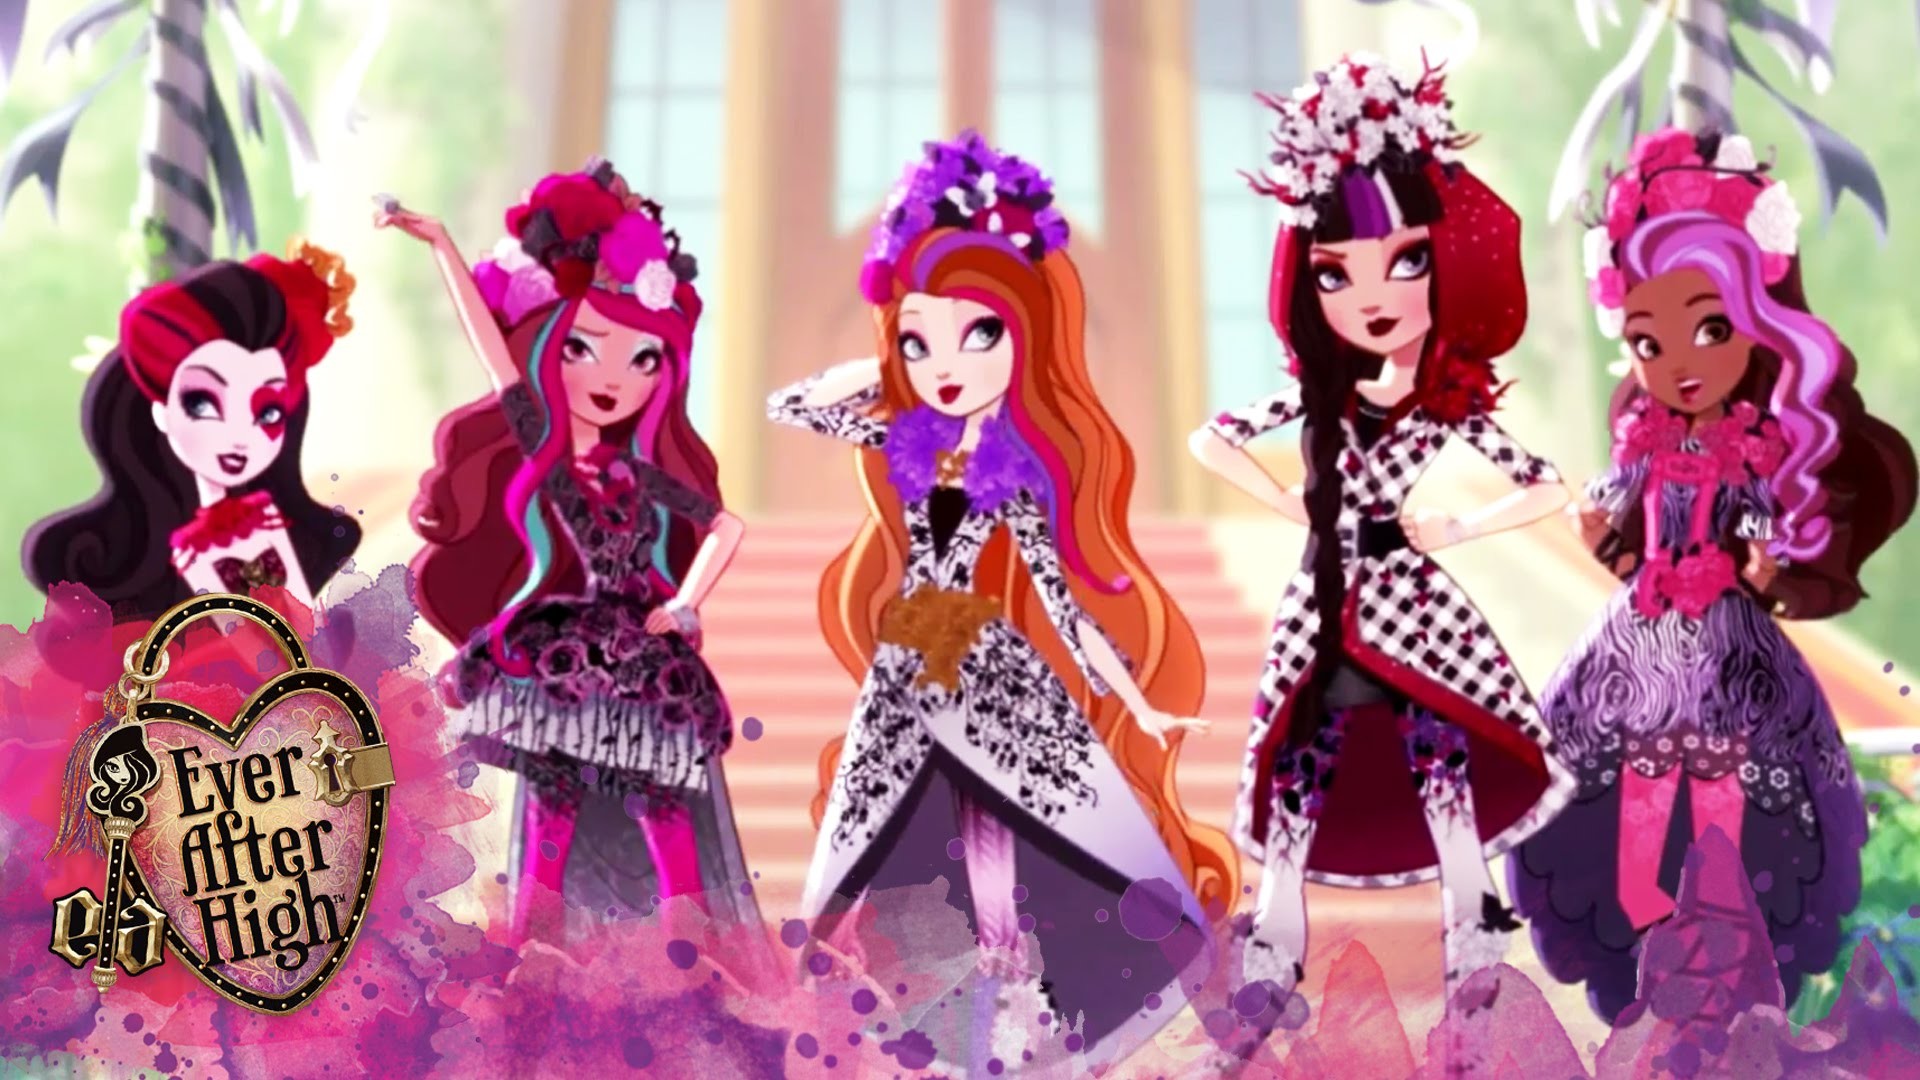 Raven Queen (Ever After High) - v1.0 | Stable Diffusion LoRA | Civitai